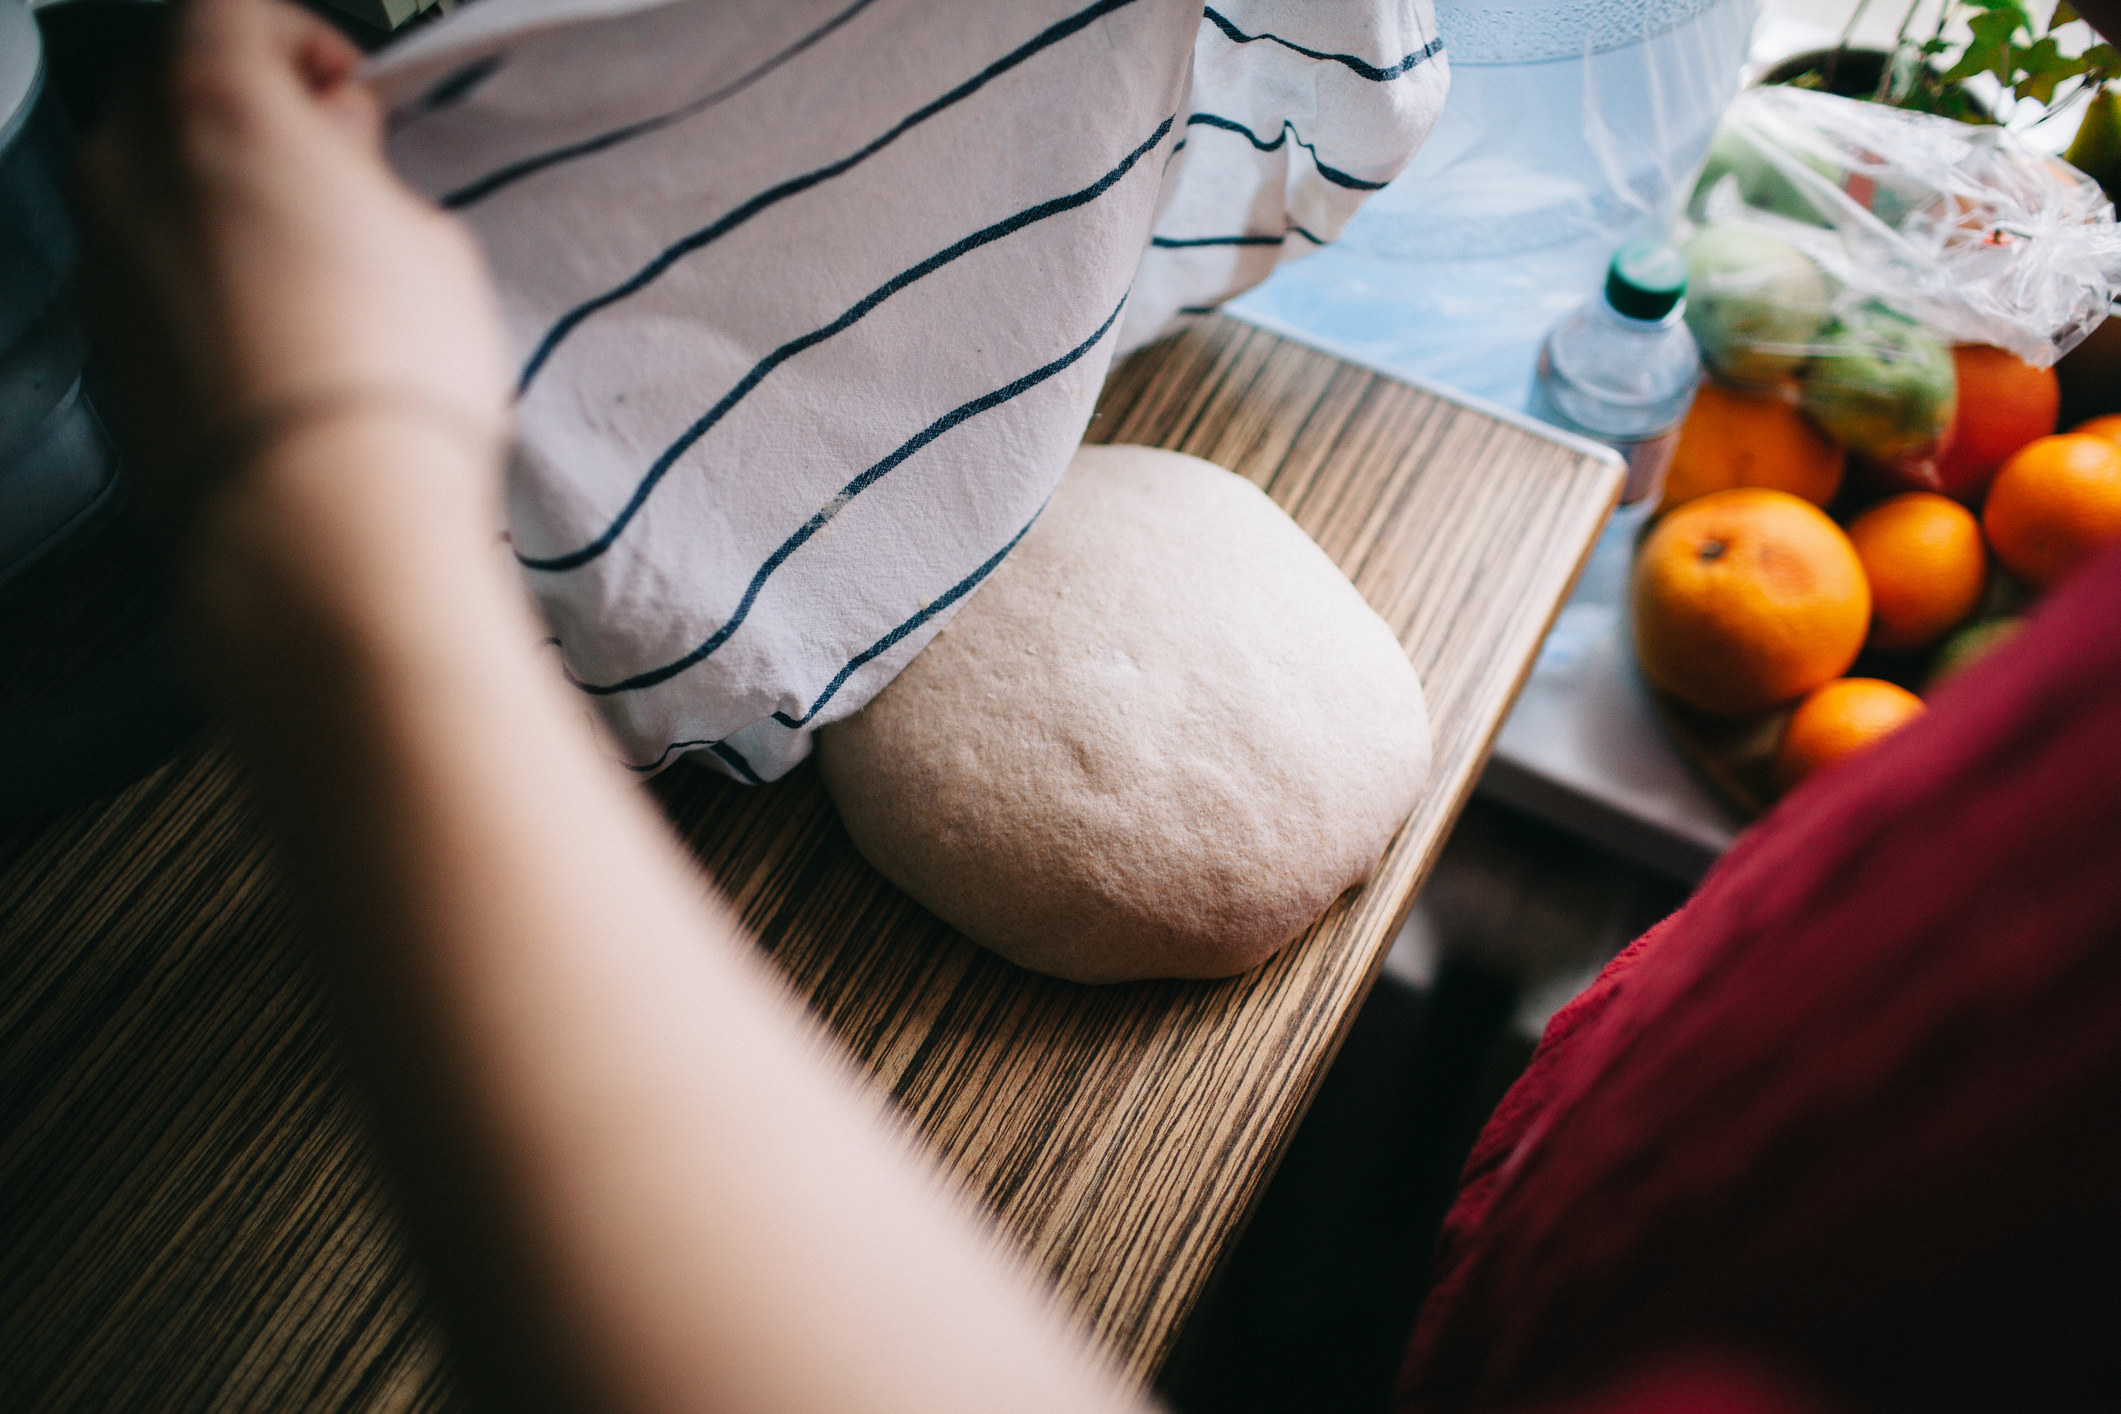 Holding towel above a piece of bread dough